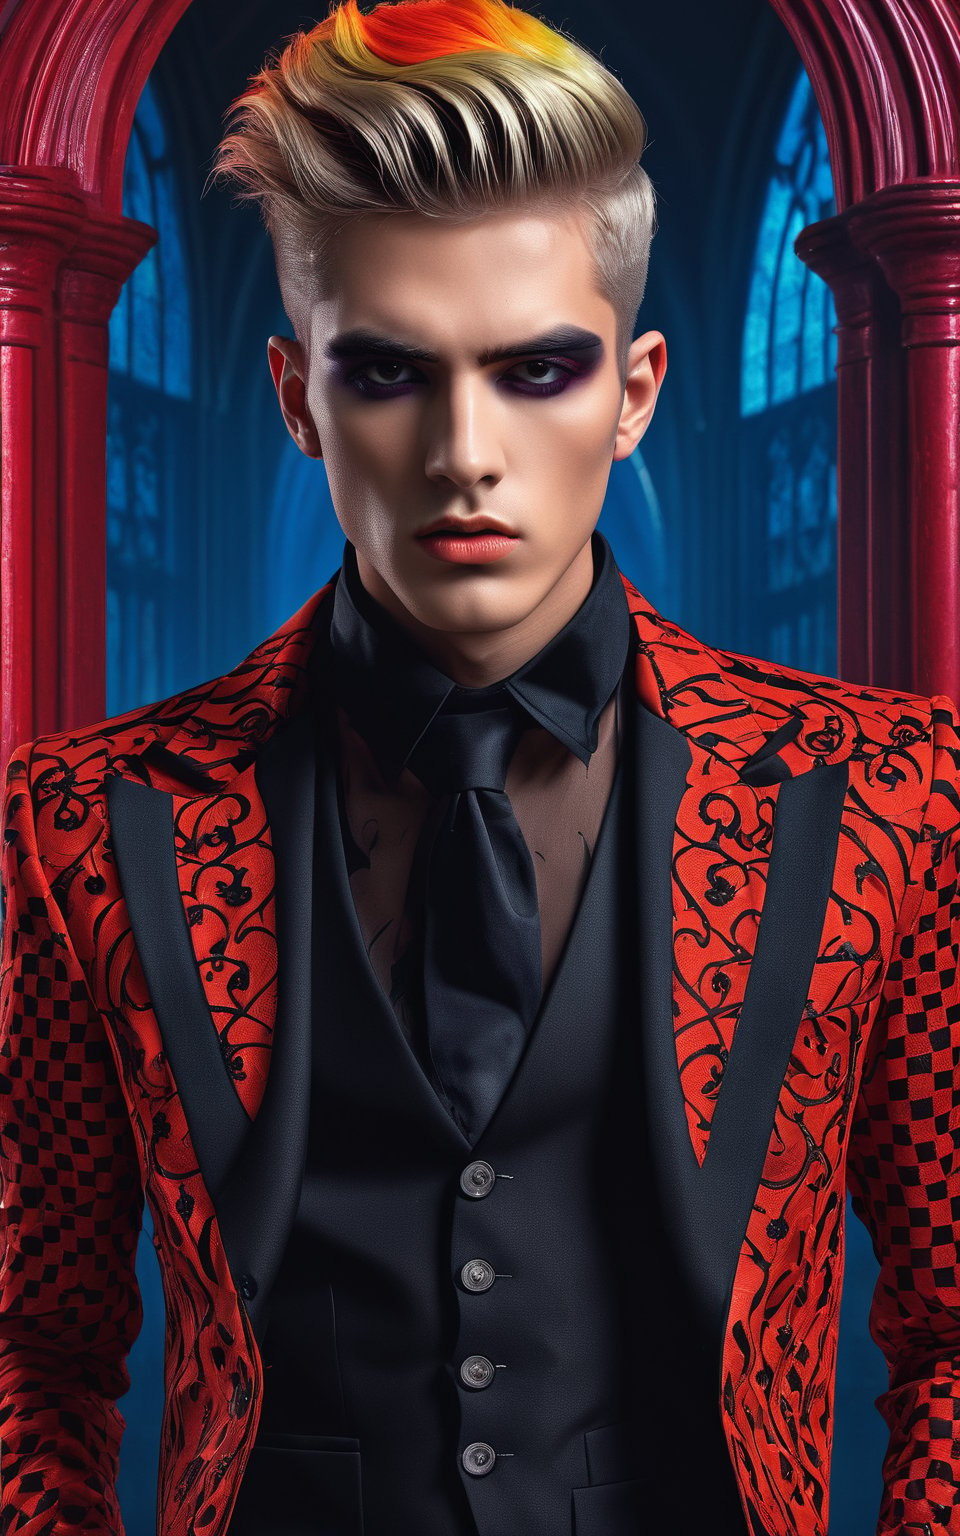 (best quality, 4K, 8K, high-resolution, masterpiece), ultra-detailed, photorealistic, young man, striking appearance, bold Neo-Gothic makeup, bold Neo-Gothic hair, vibrant Pop Art inspired outfit, colorful, high-contrast, surreal atmosphere, digital art.